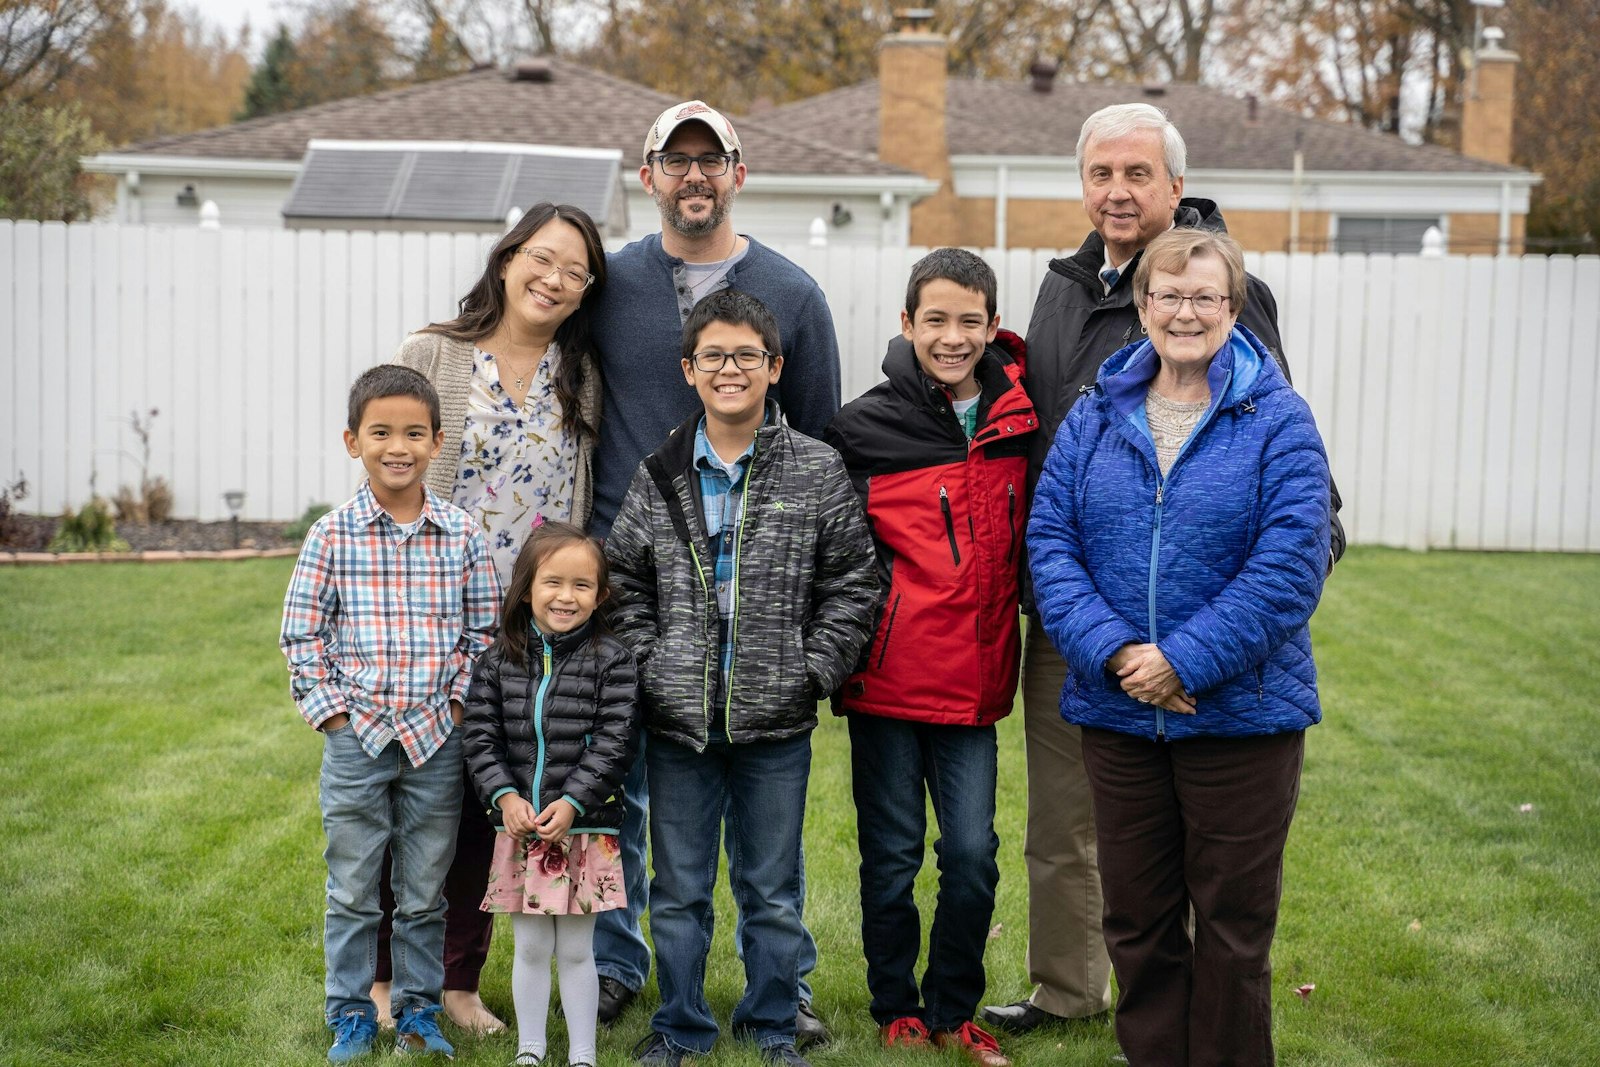 Nicole Joyce, left, is pictured with her family in 2019. Joyce, associate director of family ministry for the Archdiocese of Detroit, said Compass was developed after the archdiocese began fielding calls from parents during the pandemic with questions about how to talk to their children about the faith.